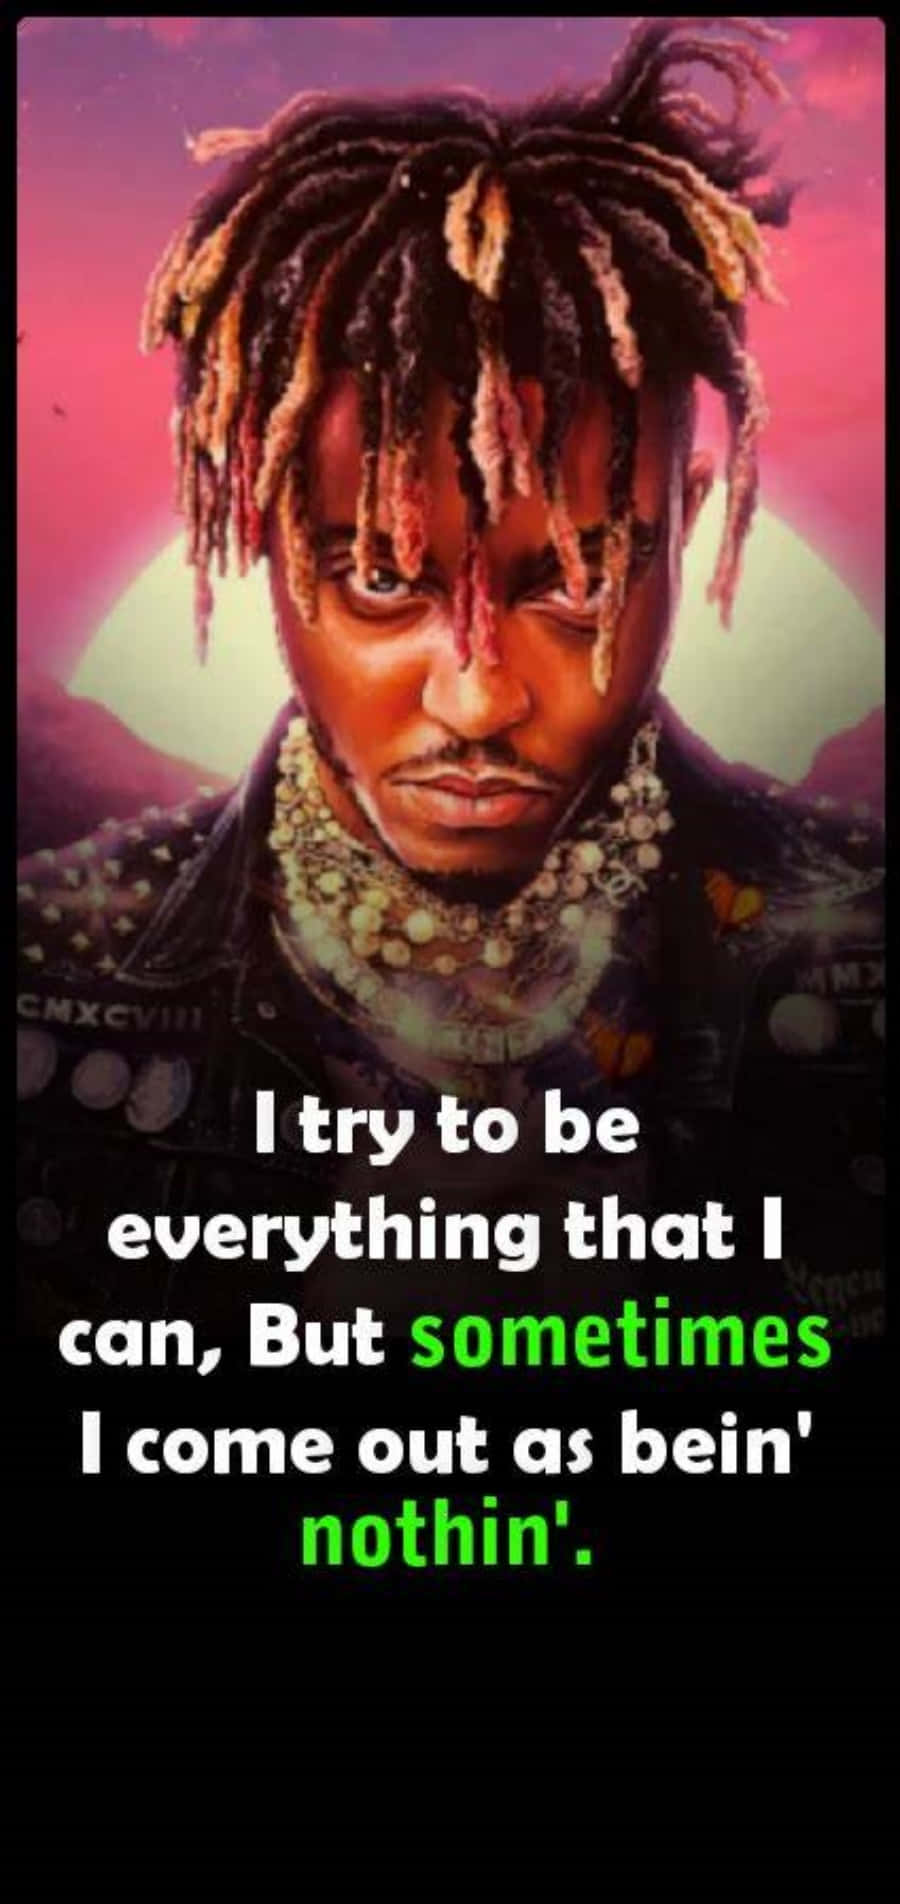 Inspirational Juice Wrld Quote Set Against Dramatic Skyscape Background Wallpaper